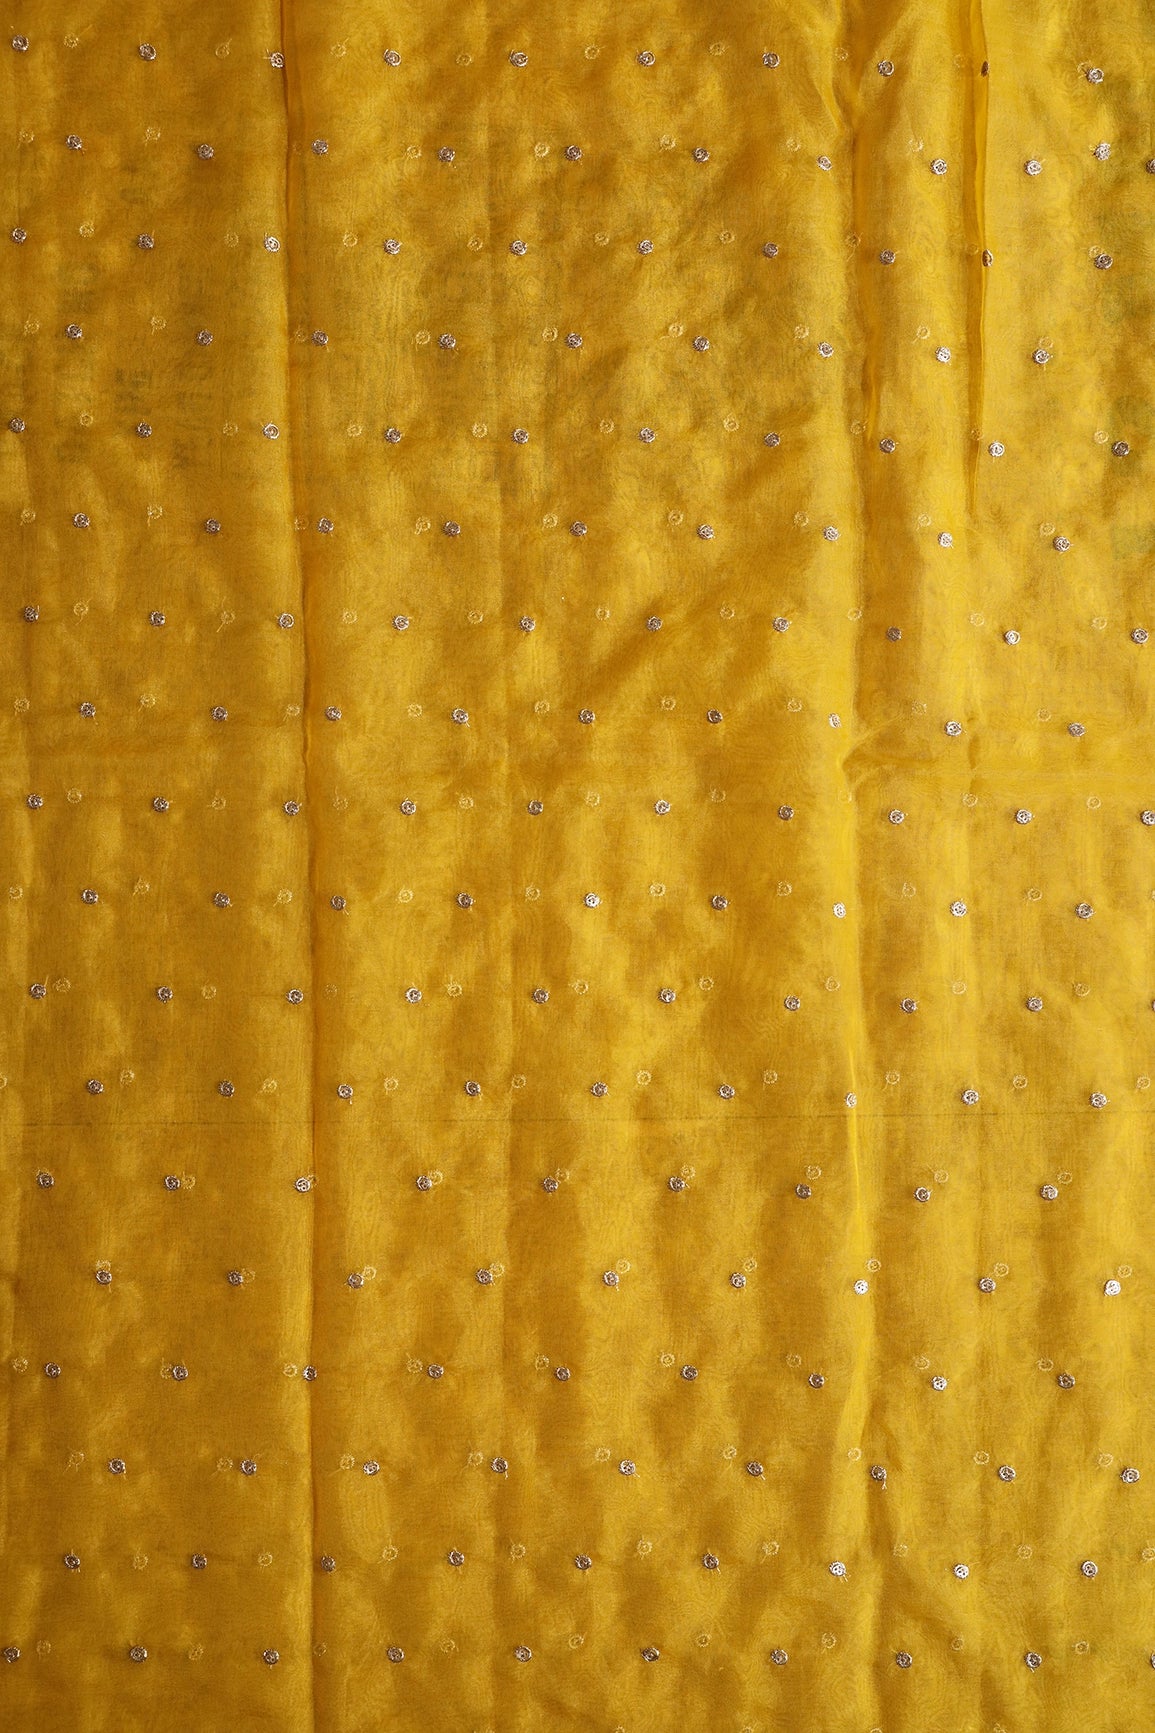 2 Meter Cut Piece Of Gold Zari With Gold Sequins Small Motif Embroidery On Yellow Organza Fabric